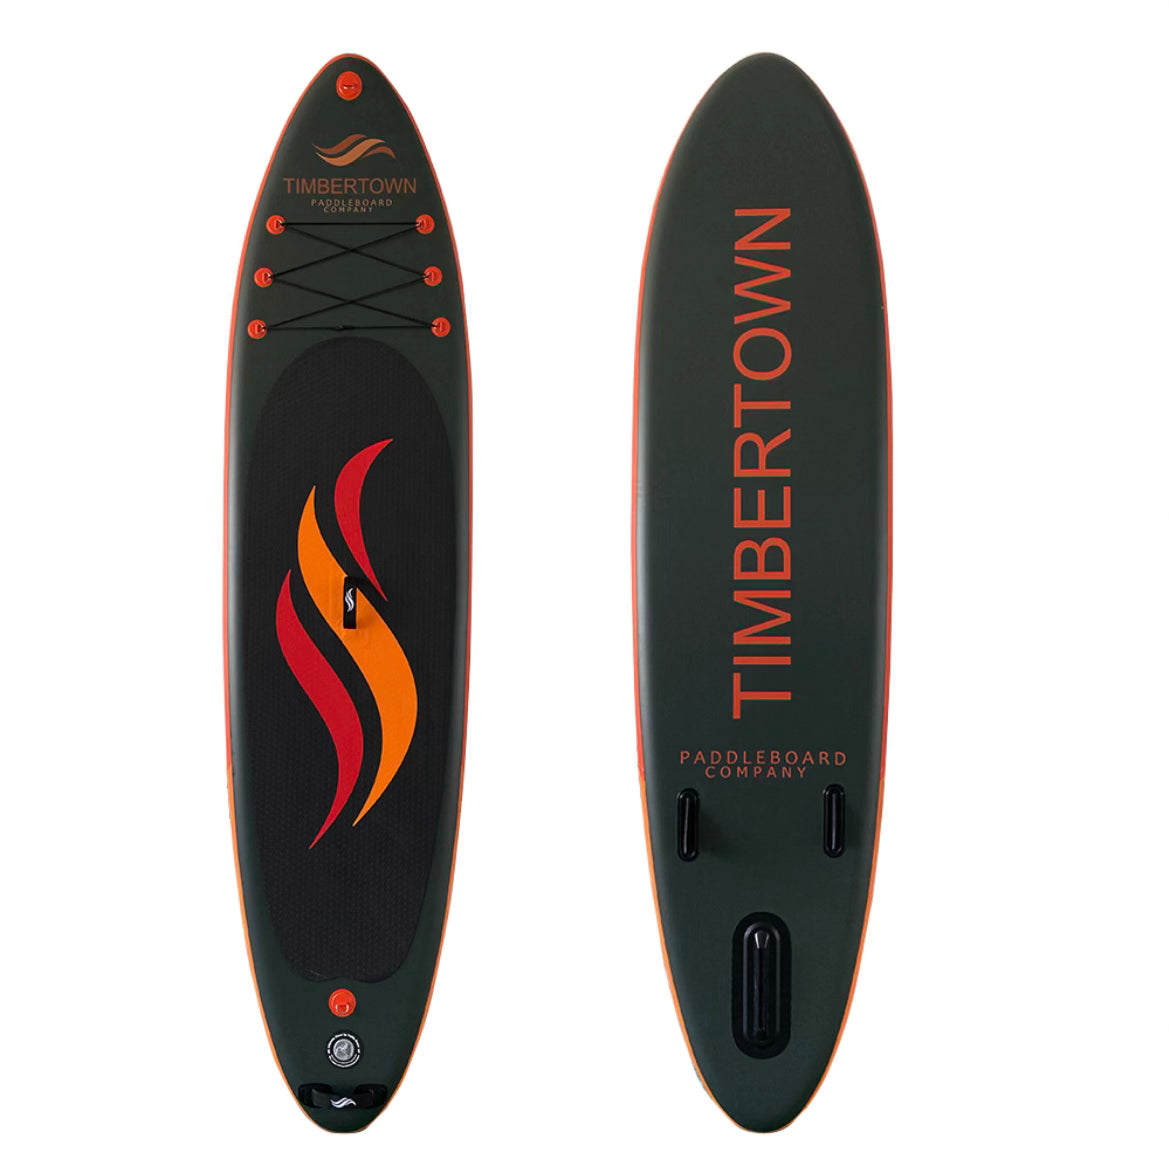 The Midnight Run 11’ x 32” x 6” Inflatable Paddleboard Package